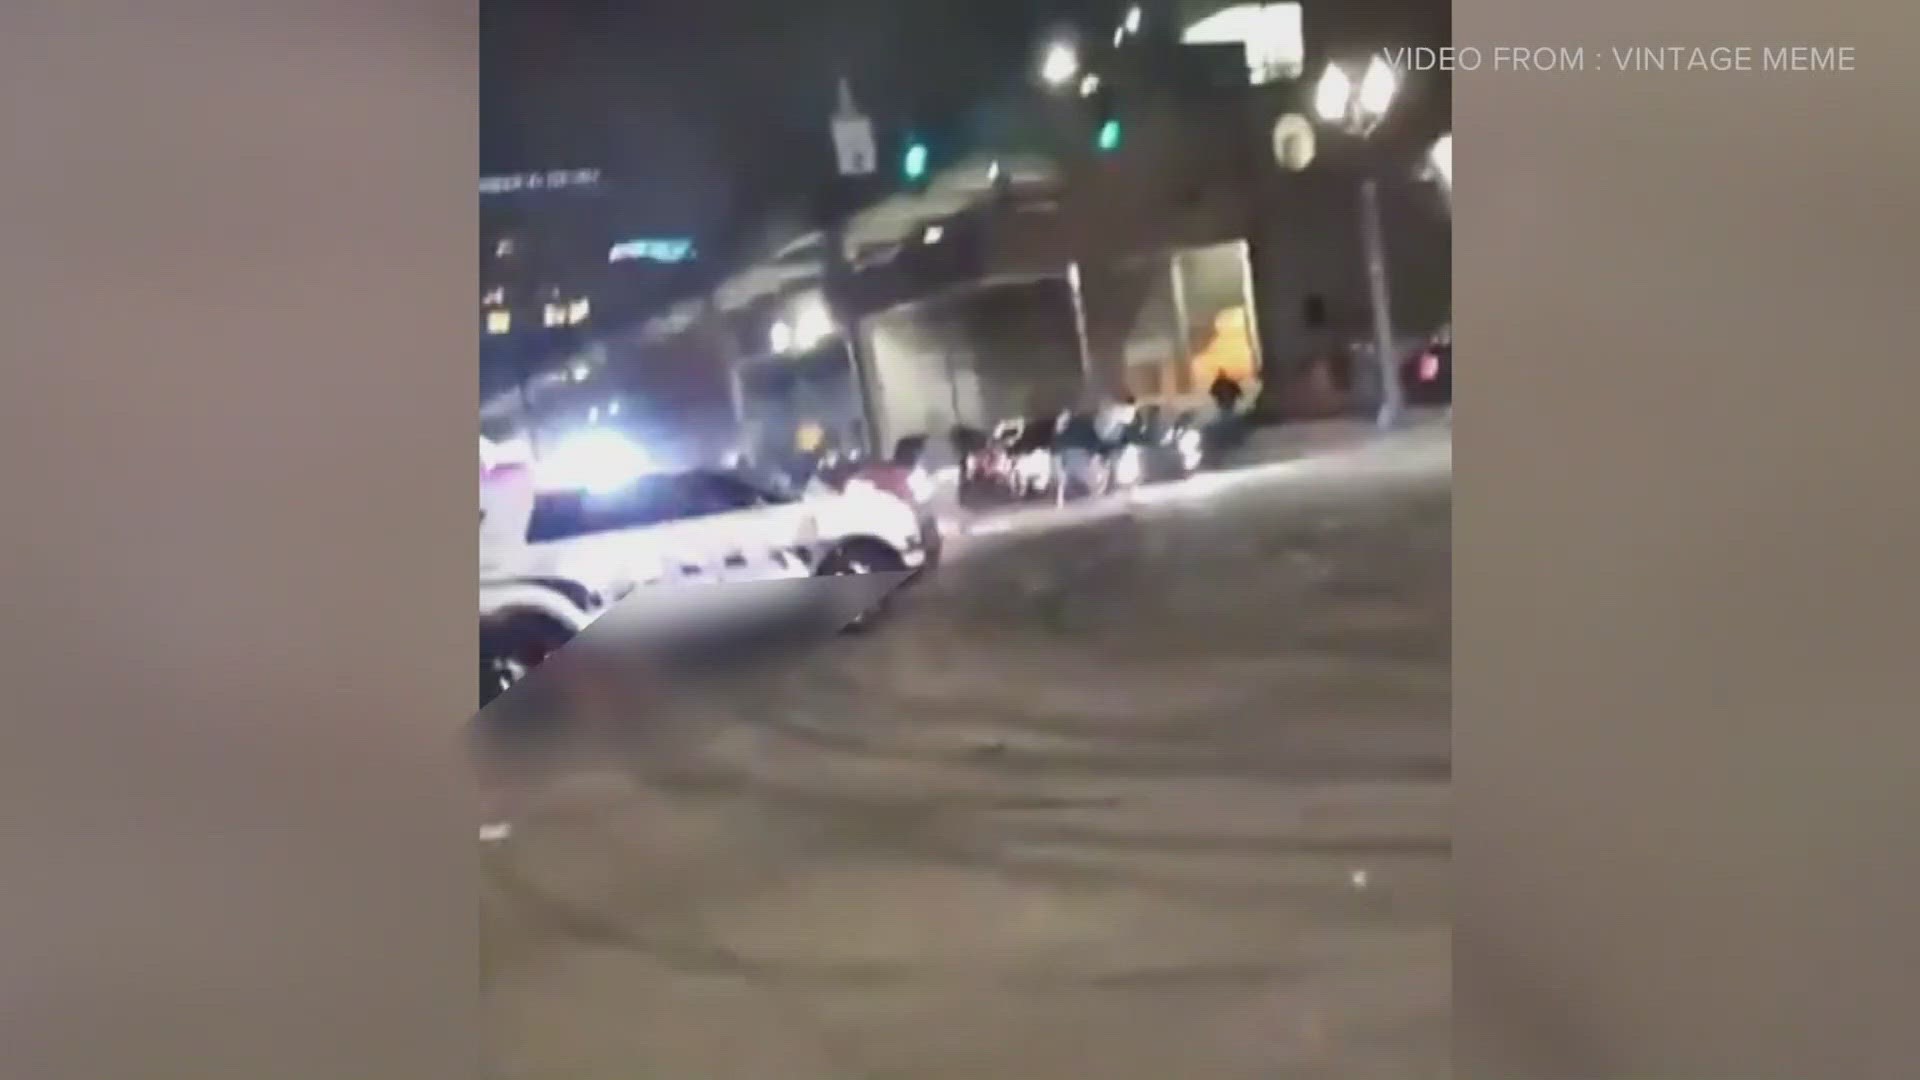 The video of the officer driving through the crowd at the street race was posted on social media. The Pierce County Prosecuting Attorney declined to press charges.